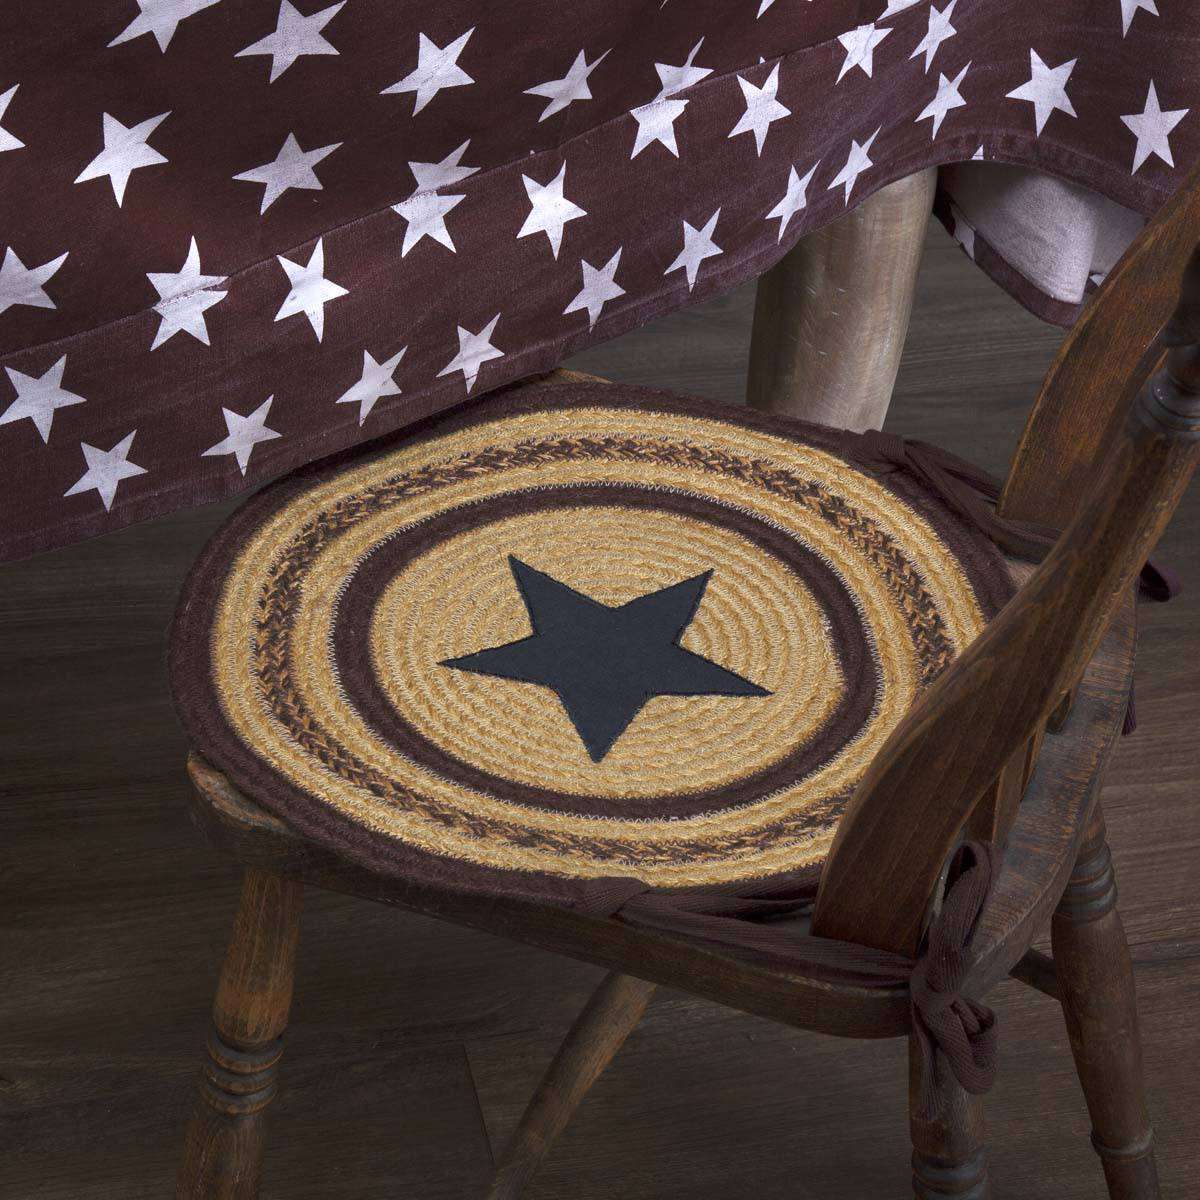 Potomac Jute Applique Star Braided Chair Pad Set of 6 Natural, Burgundy, Navy Chair Pad VHC Brands 